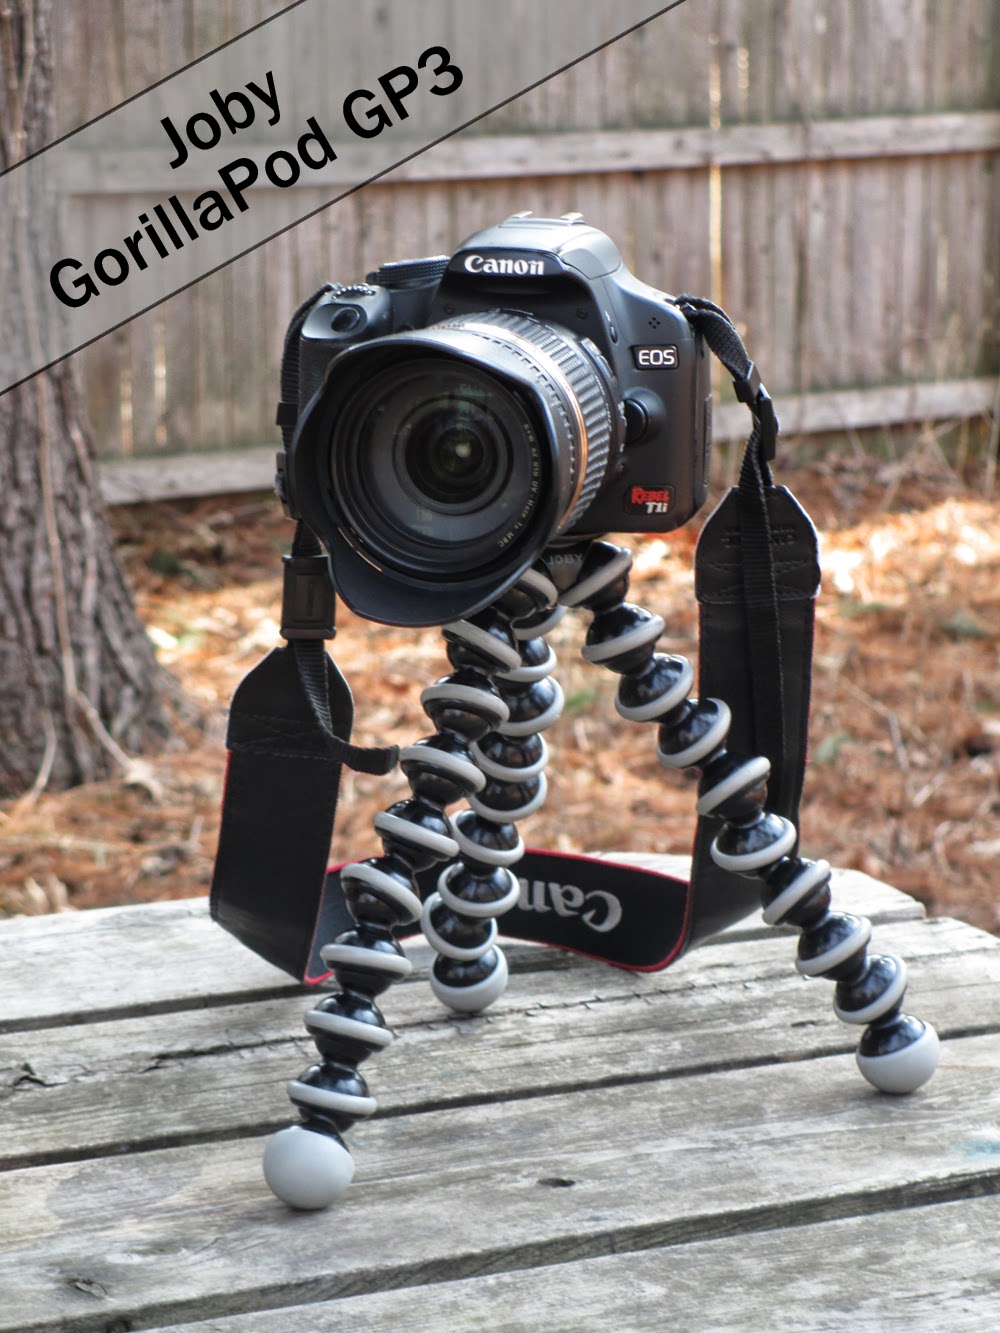 Joby GorillaPod GP3 Tripod Review | Boost Your Photography